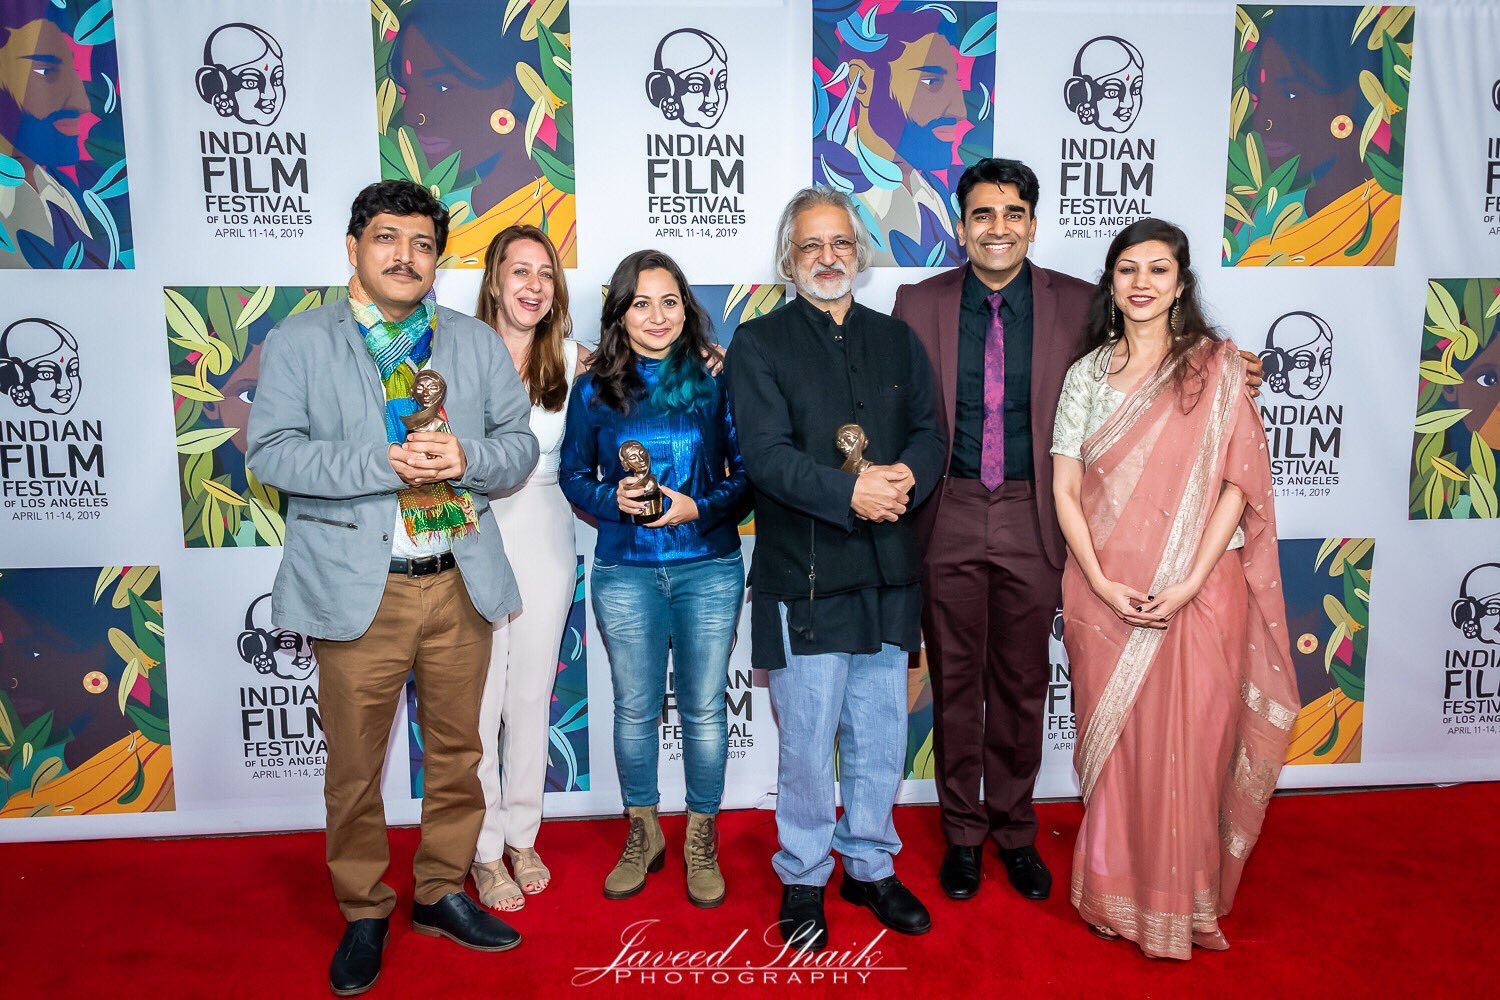 IFFLA staff with the 2019 festival winners